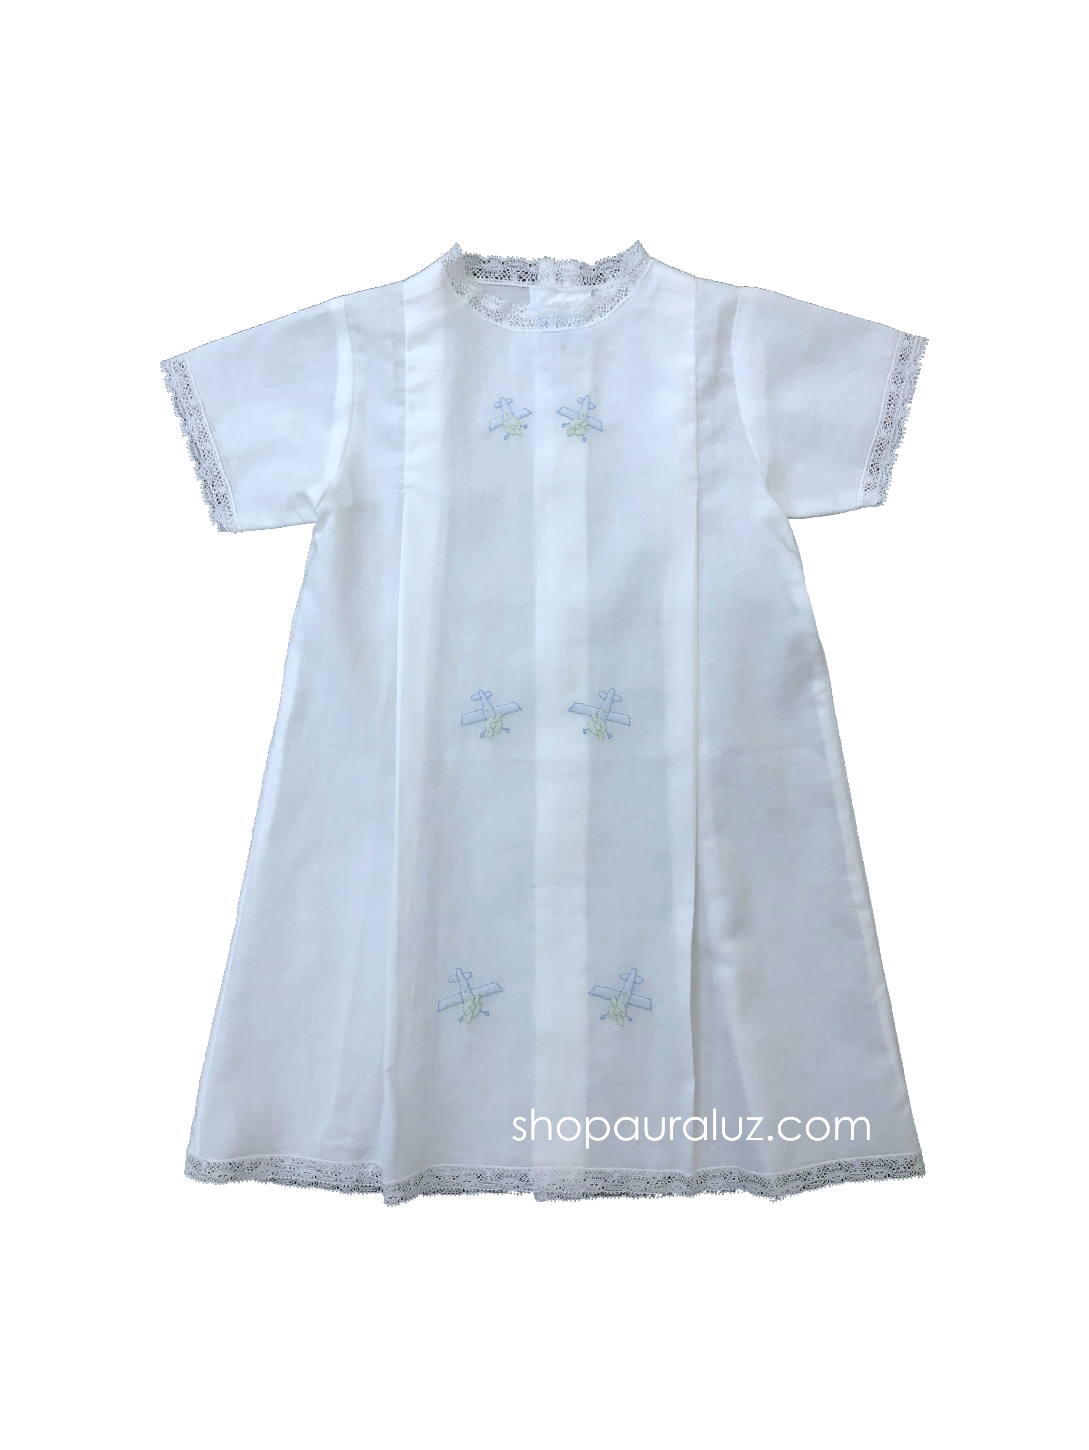 Auraluz Boy Day Gown..White with white lace and embroidered airplanes